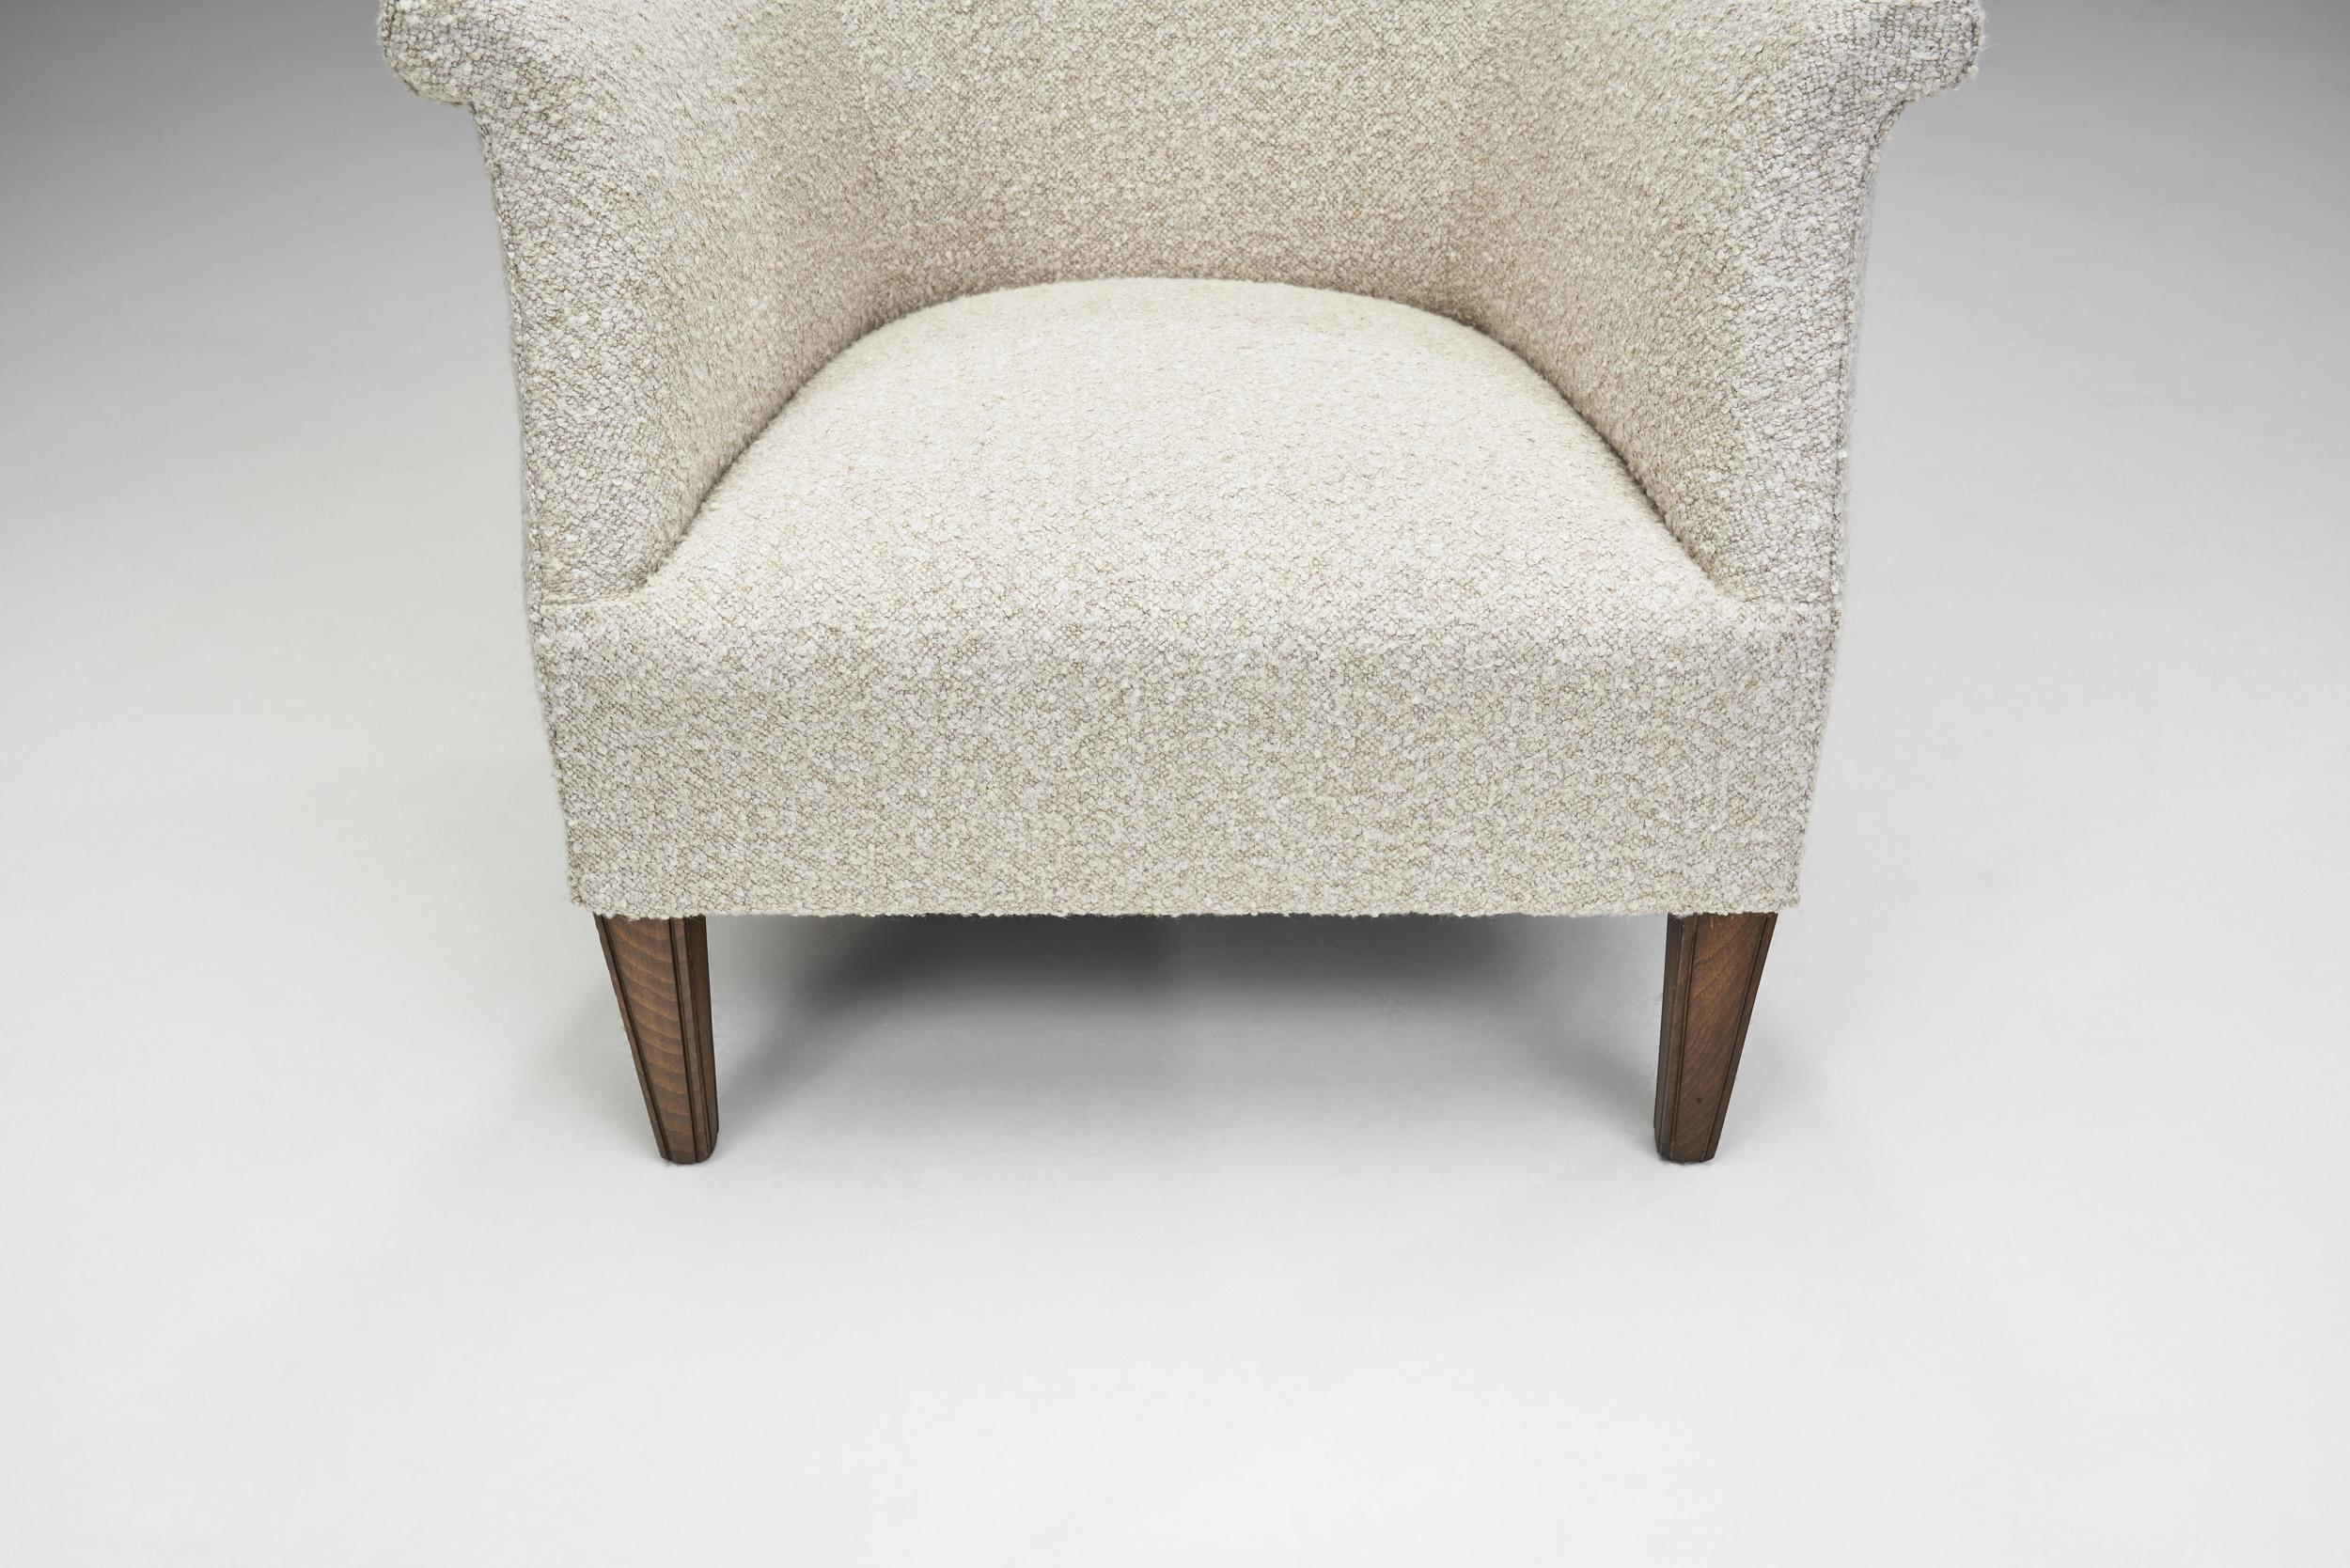 Pair of Danish Upholstered Easy Chairs with Beech Legs, Denmark 1940s For Sale 7